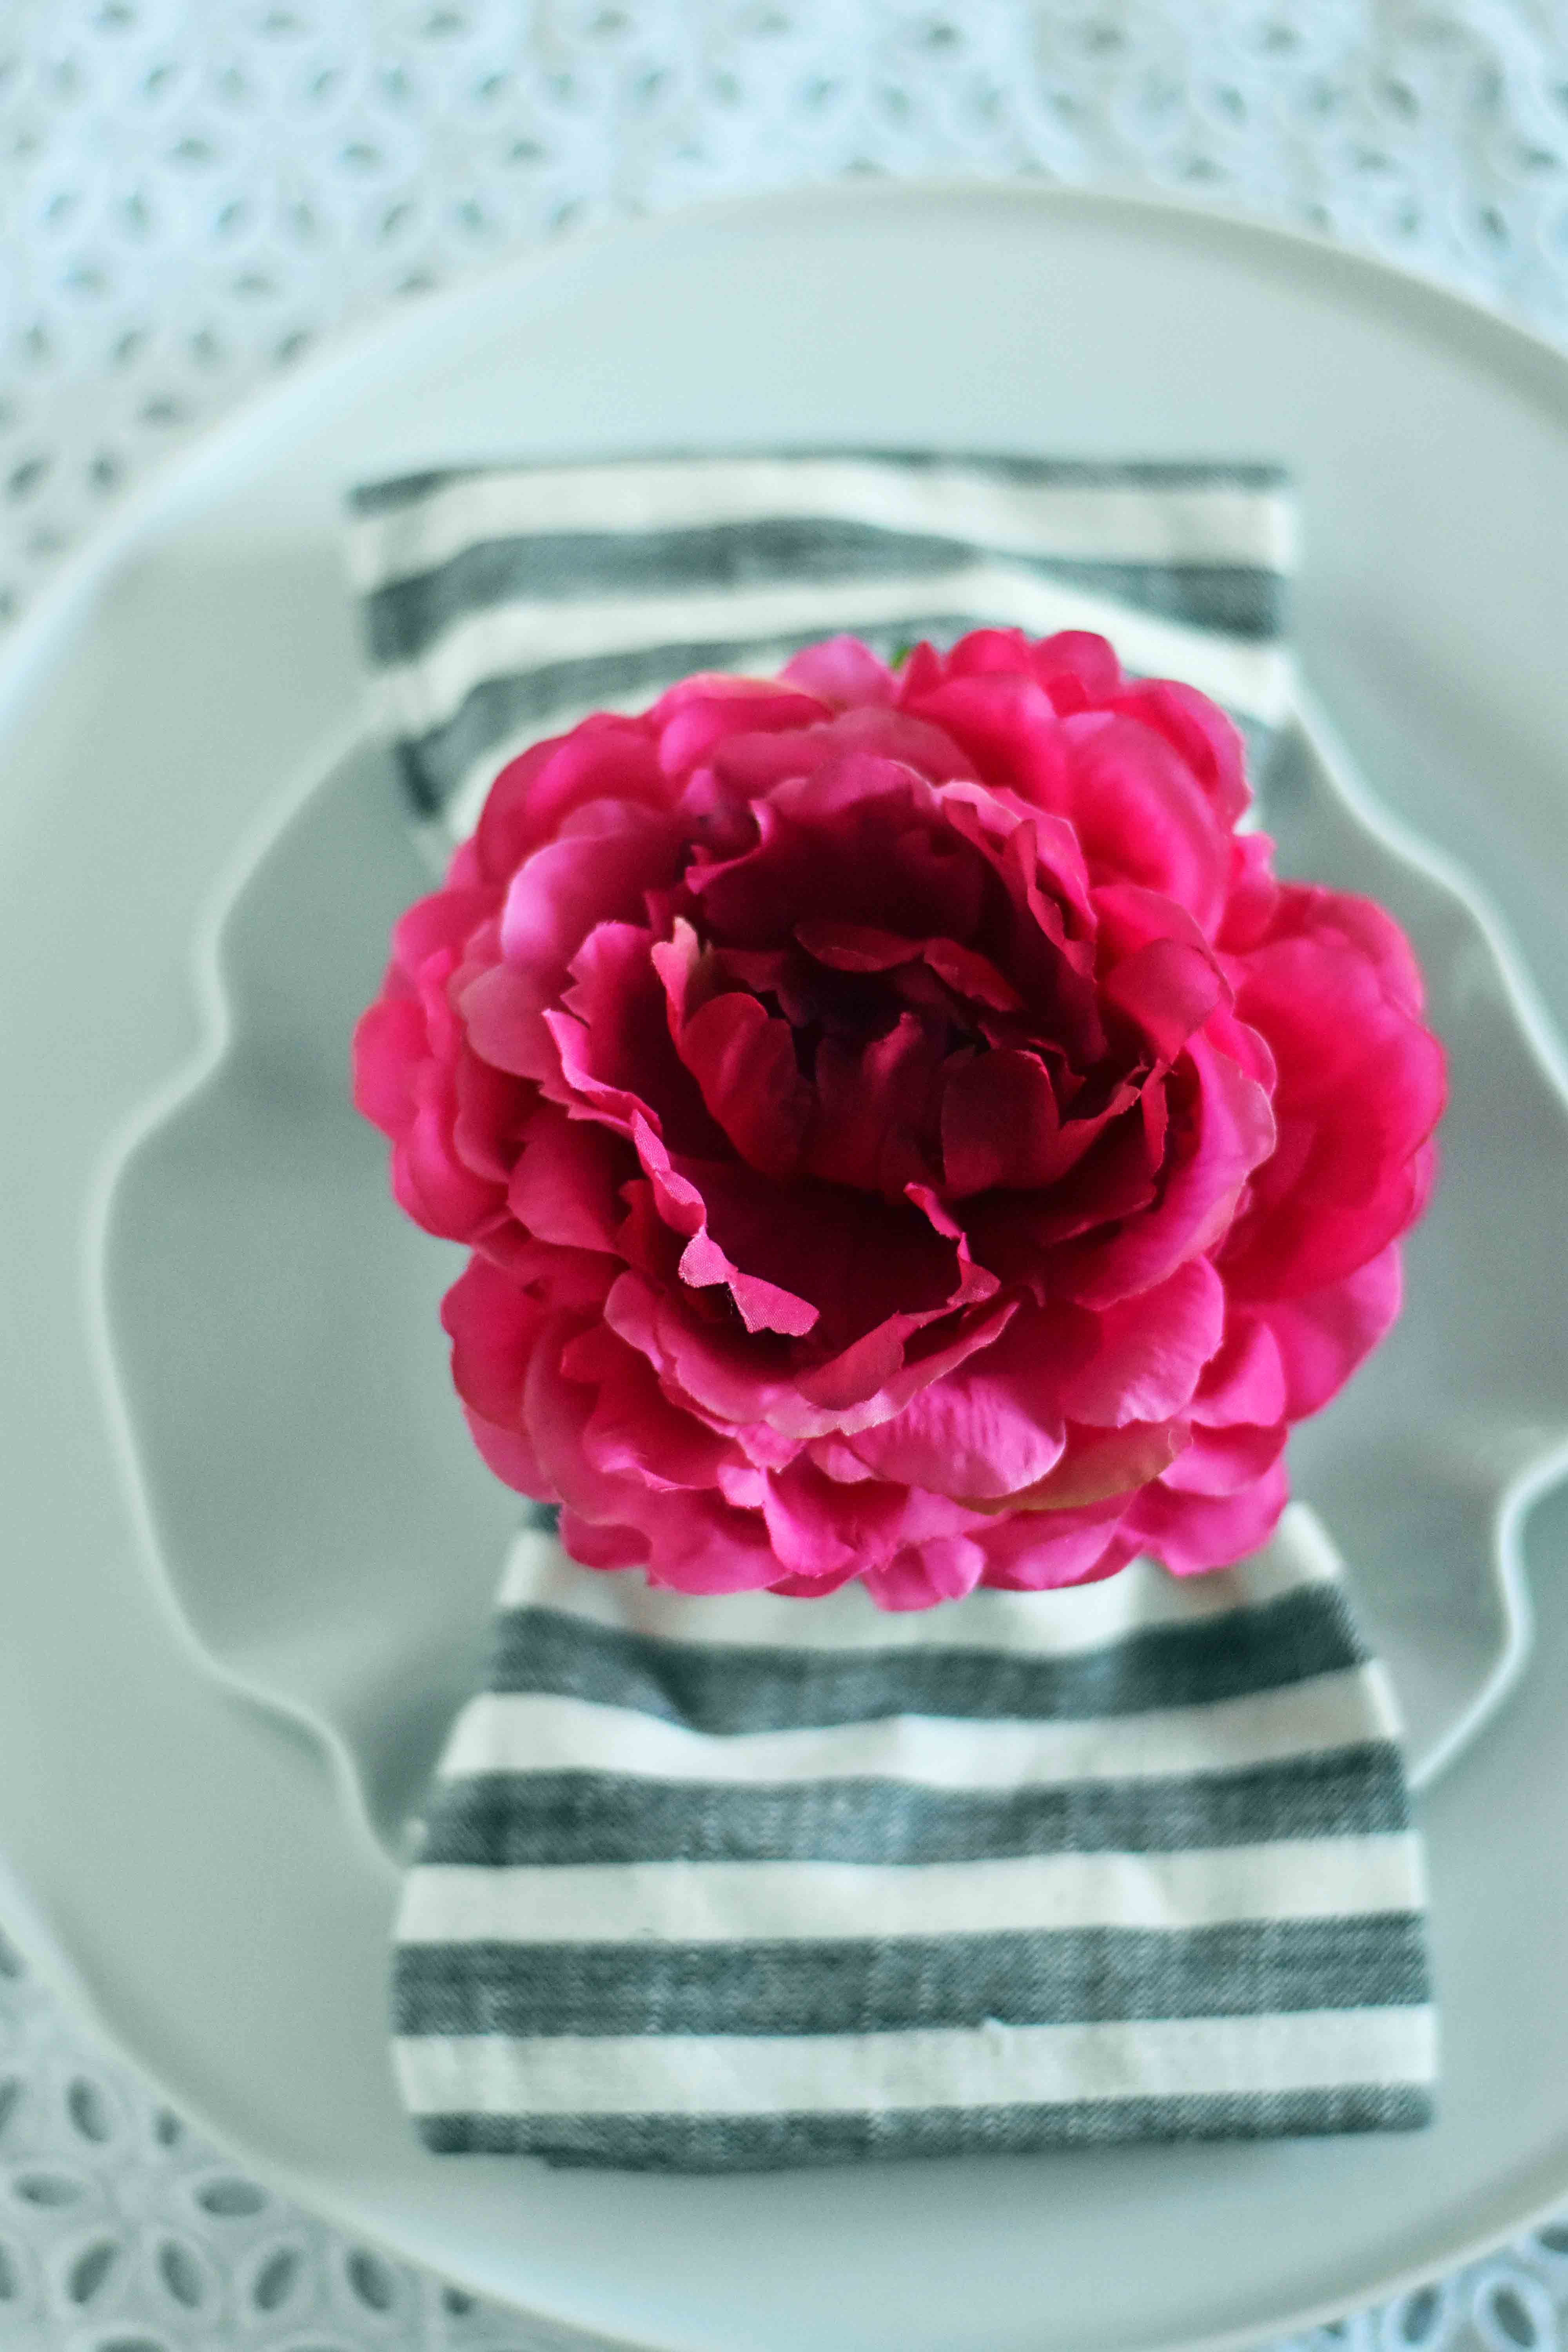 How to decorate for Spring. Beautiful Spring tablescapes. DIY decorating ideas for Spring. How to decorate your table for Spring. Pink Peonies Napkin Ring from Pier 1 Imports. Magnolia Striped Napkins from Joanna Gaines Hearth and Hand collection at Target. www.modernhoney.com